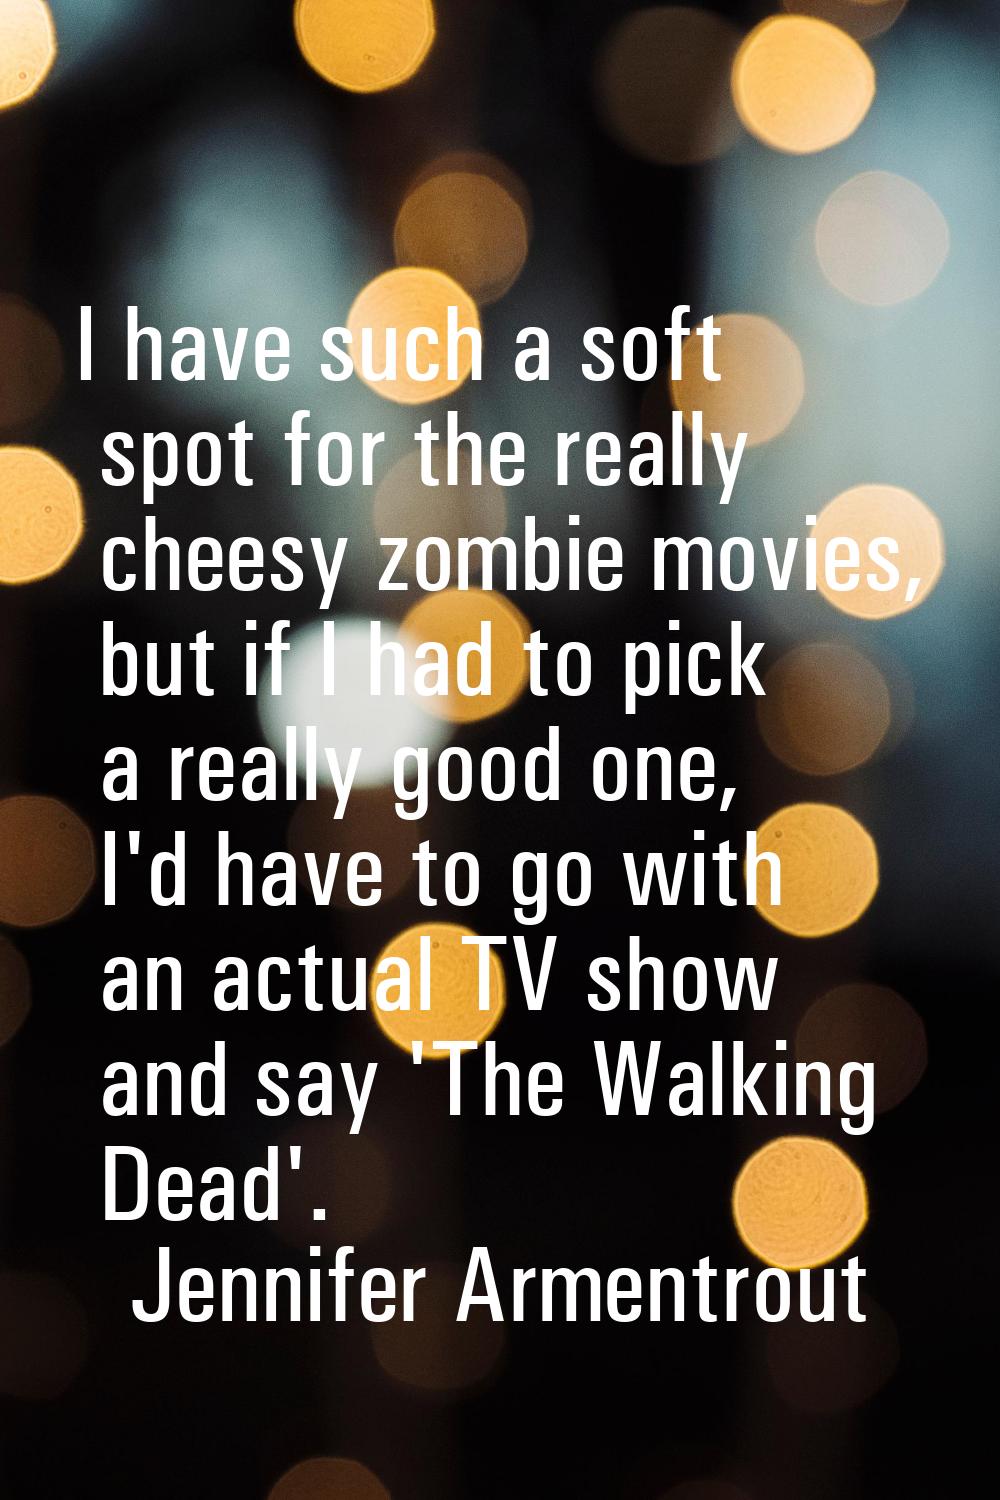 I have such a soft spot for the really cheesy zombie movies, but if I had to pick a really good one